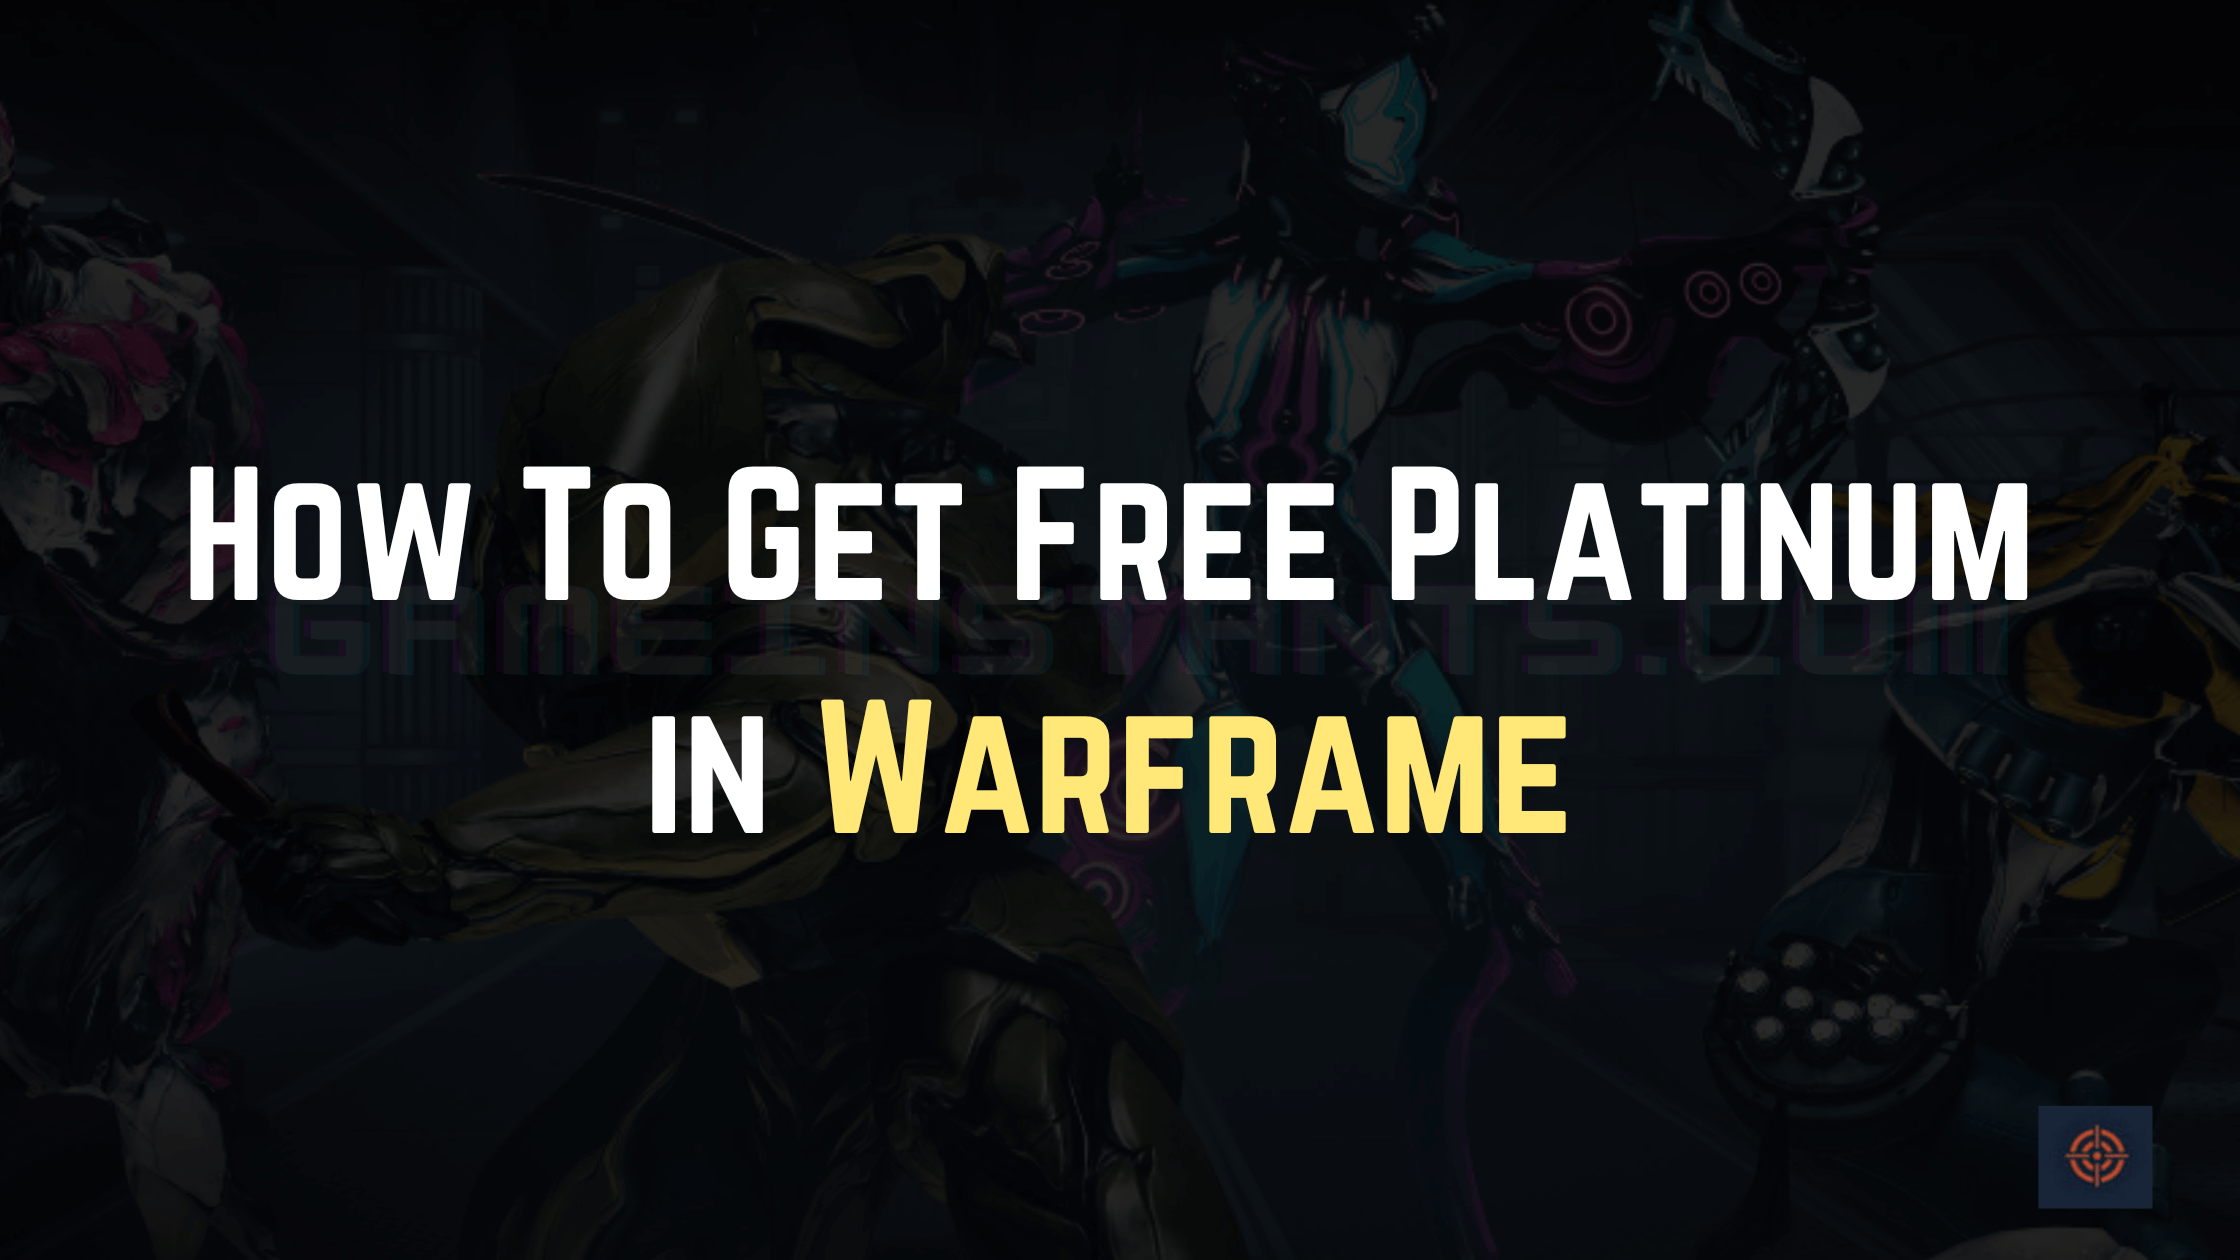 How To Get Free Platinum in Warframe